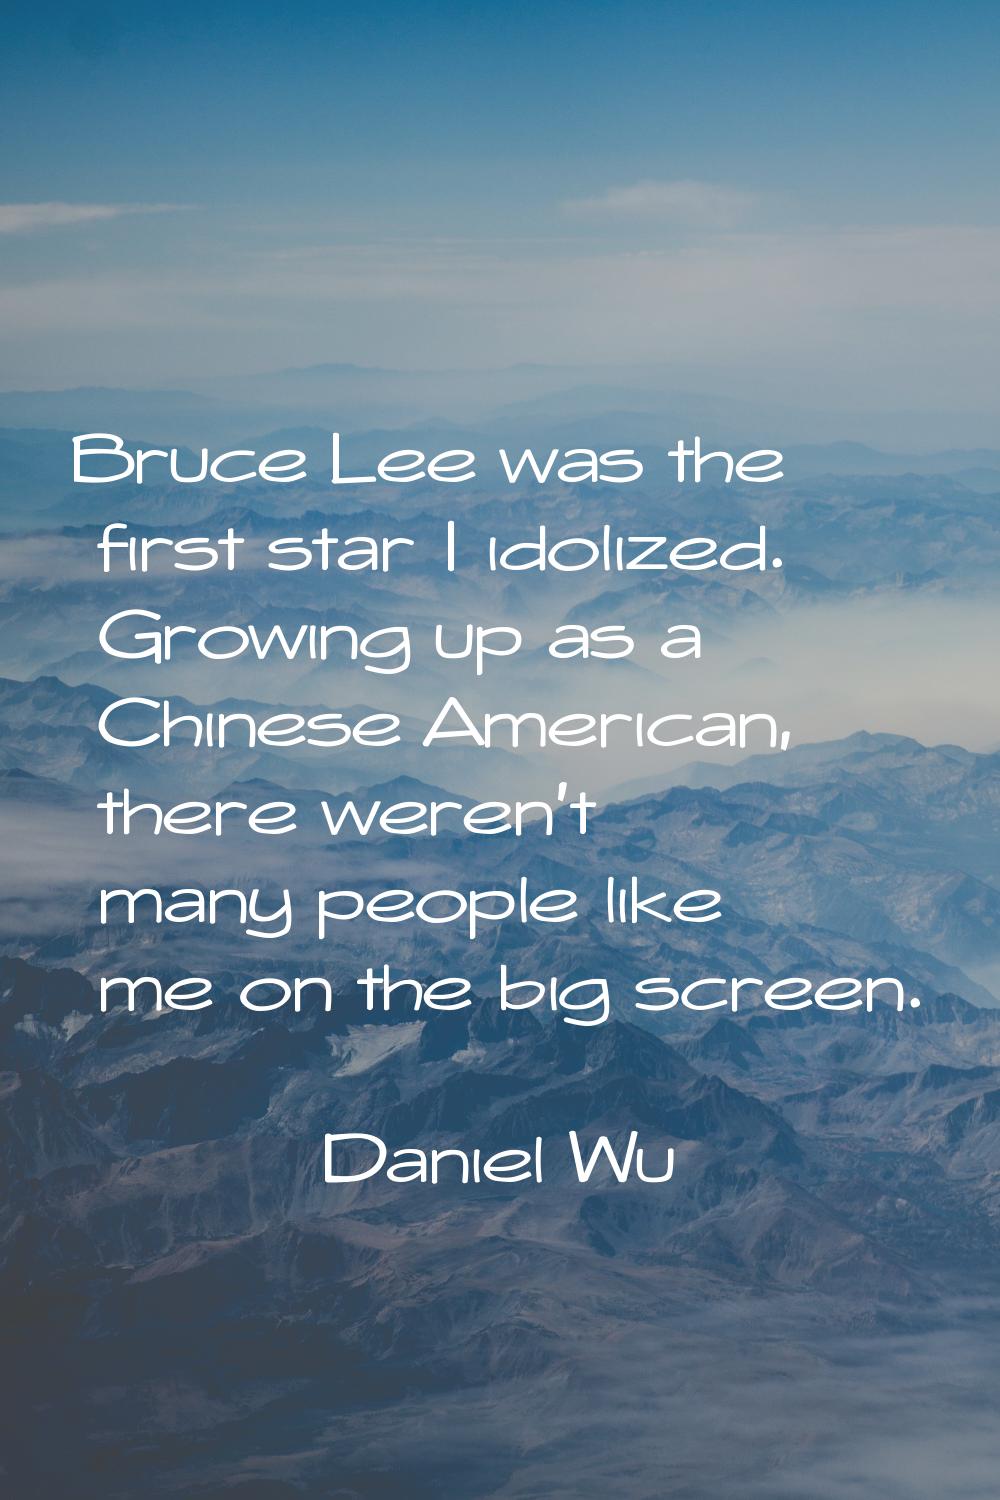 Bruce Lee was the first star I idolized. Growing up as a Chinese American, there weren't many peopl